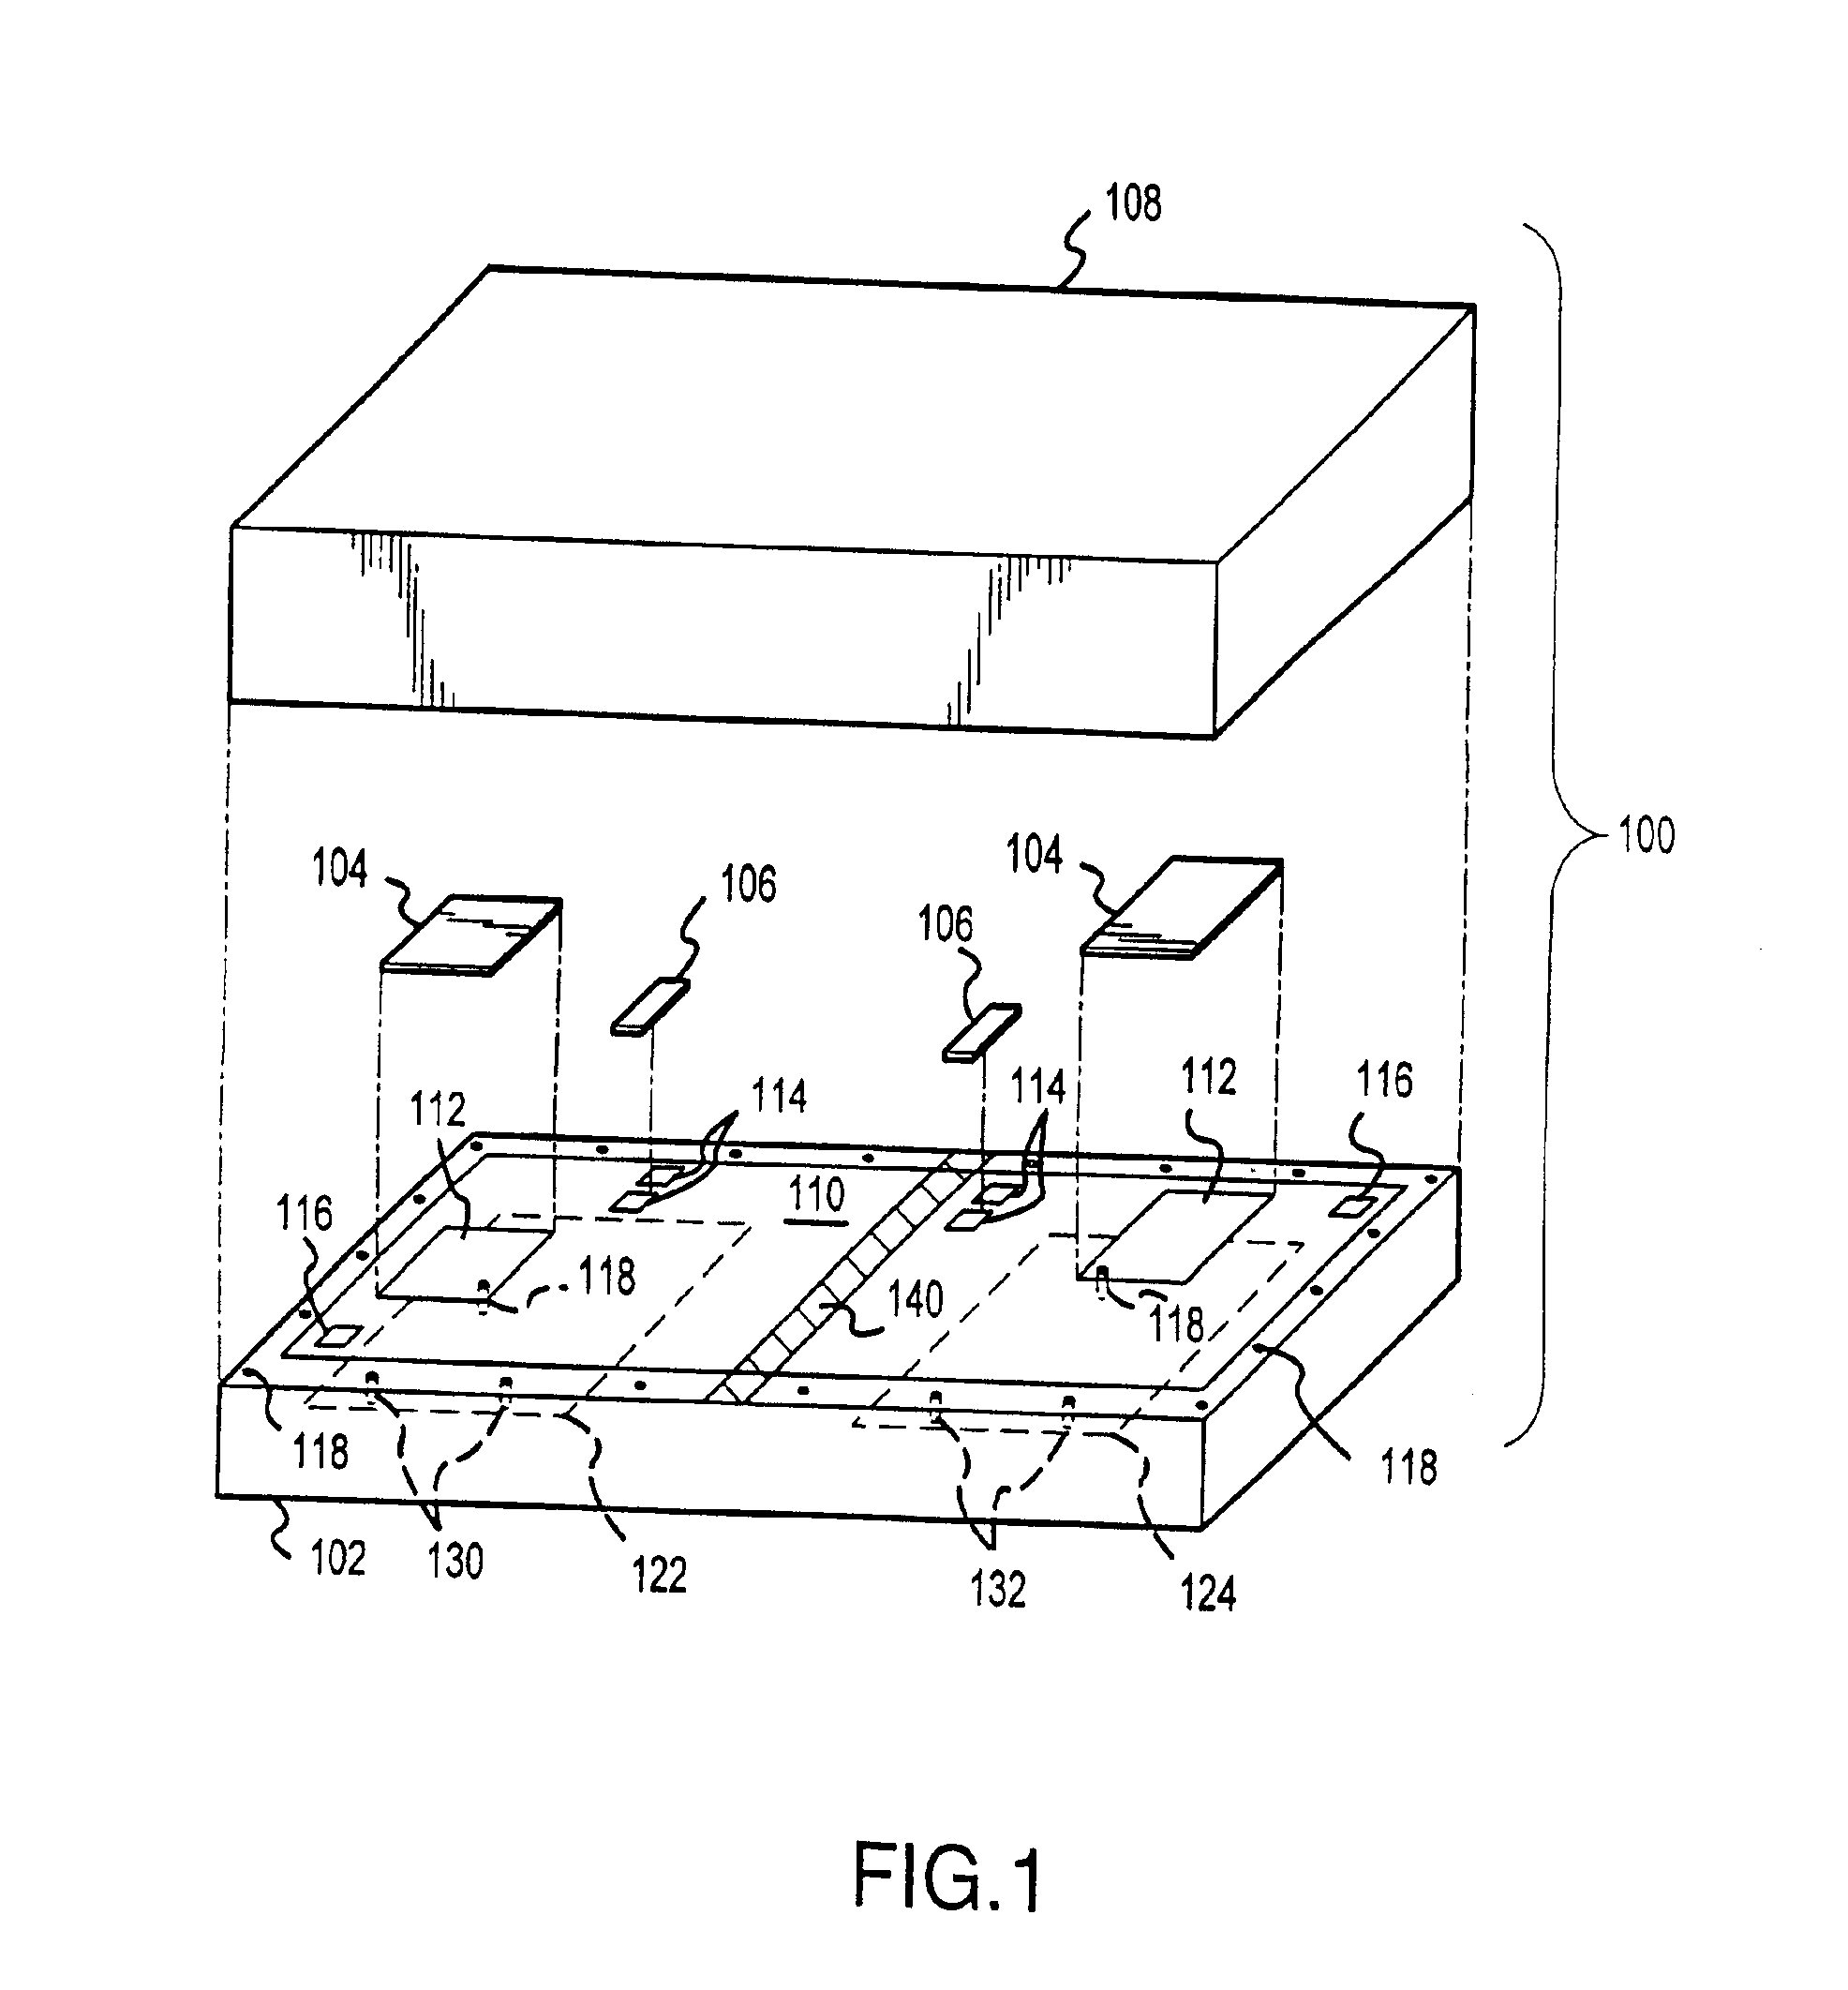 Multiple chip module with integrated RF capabilities